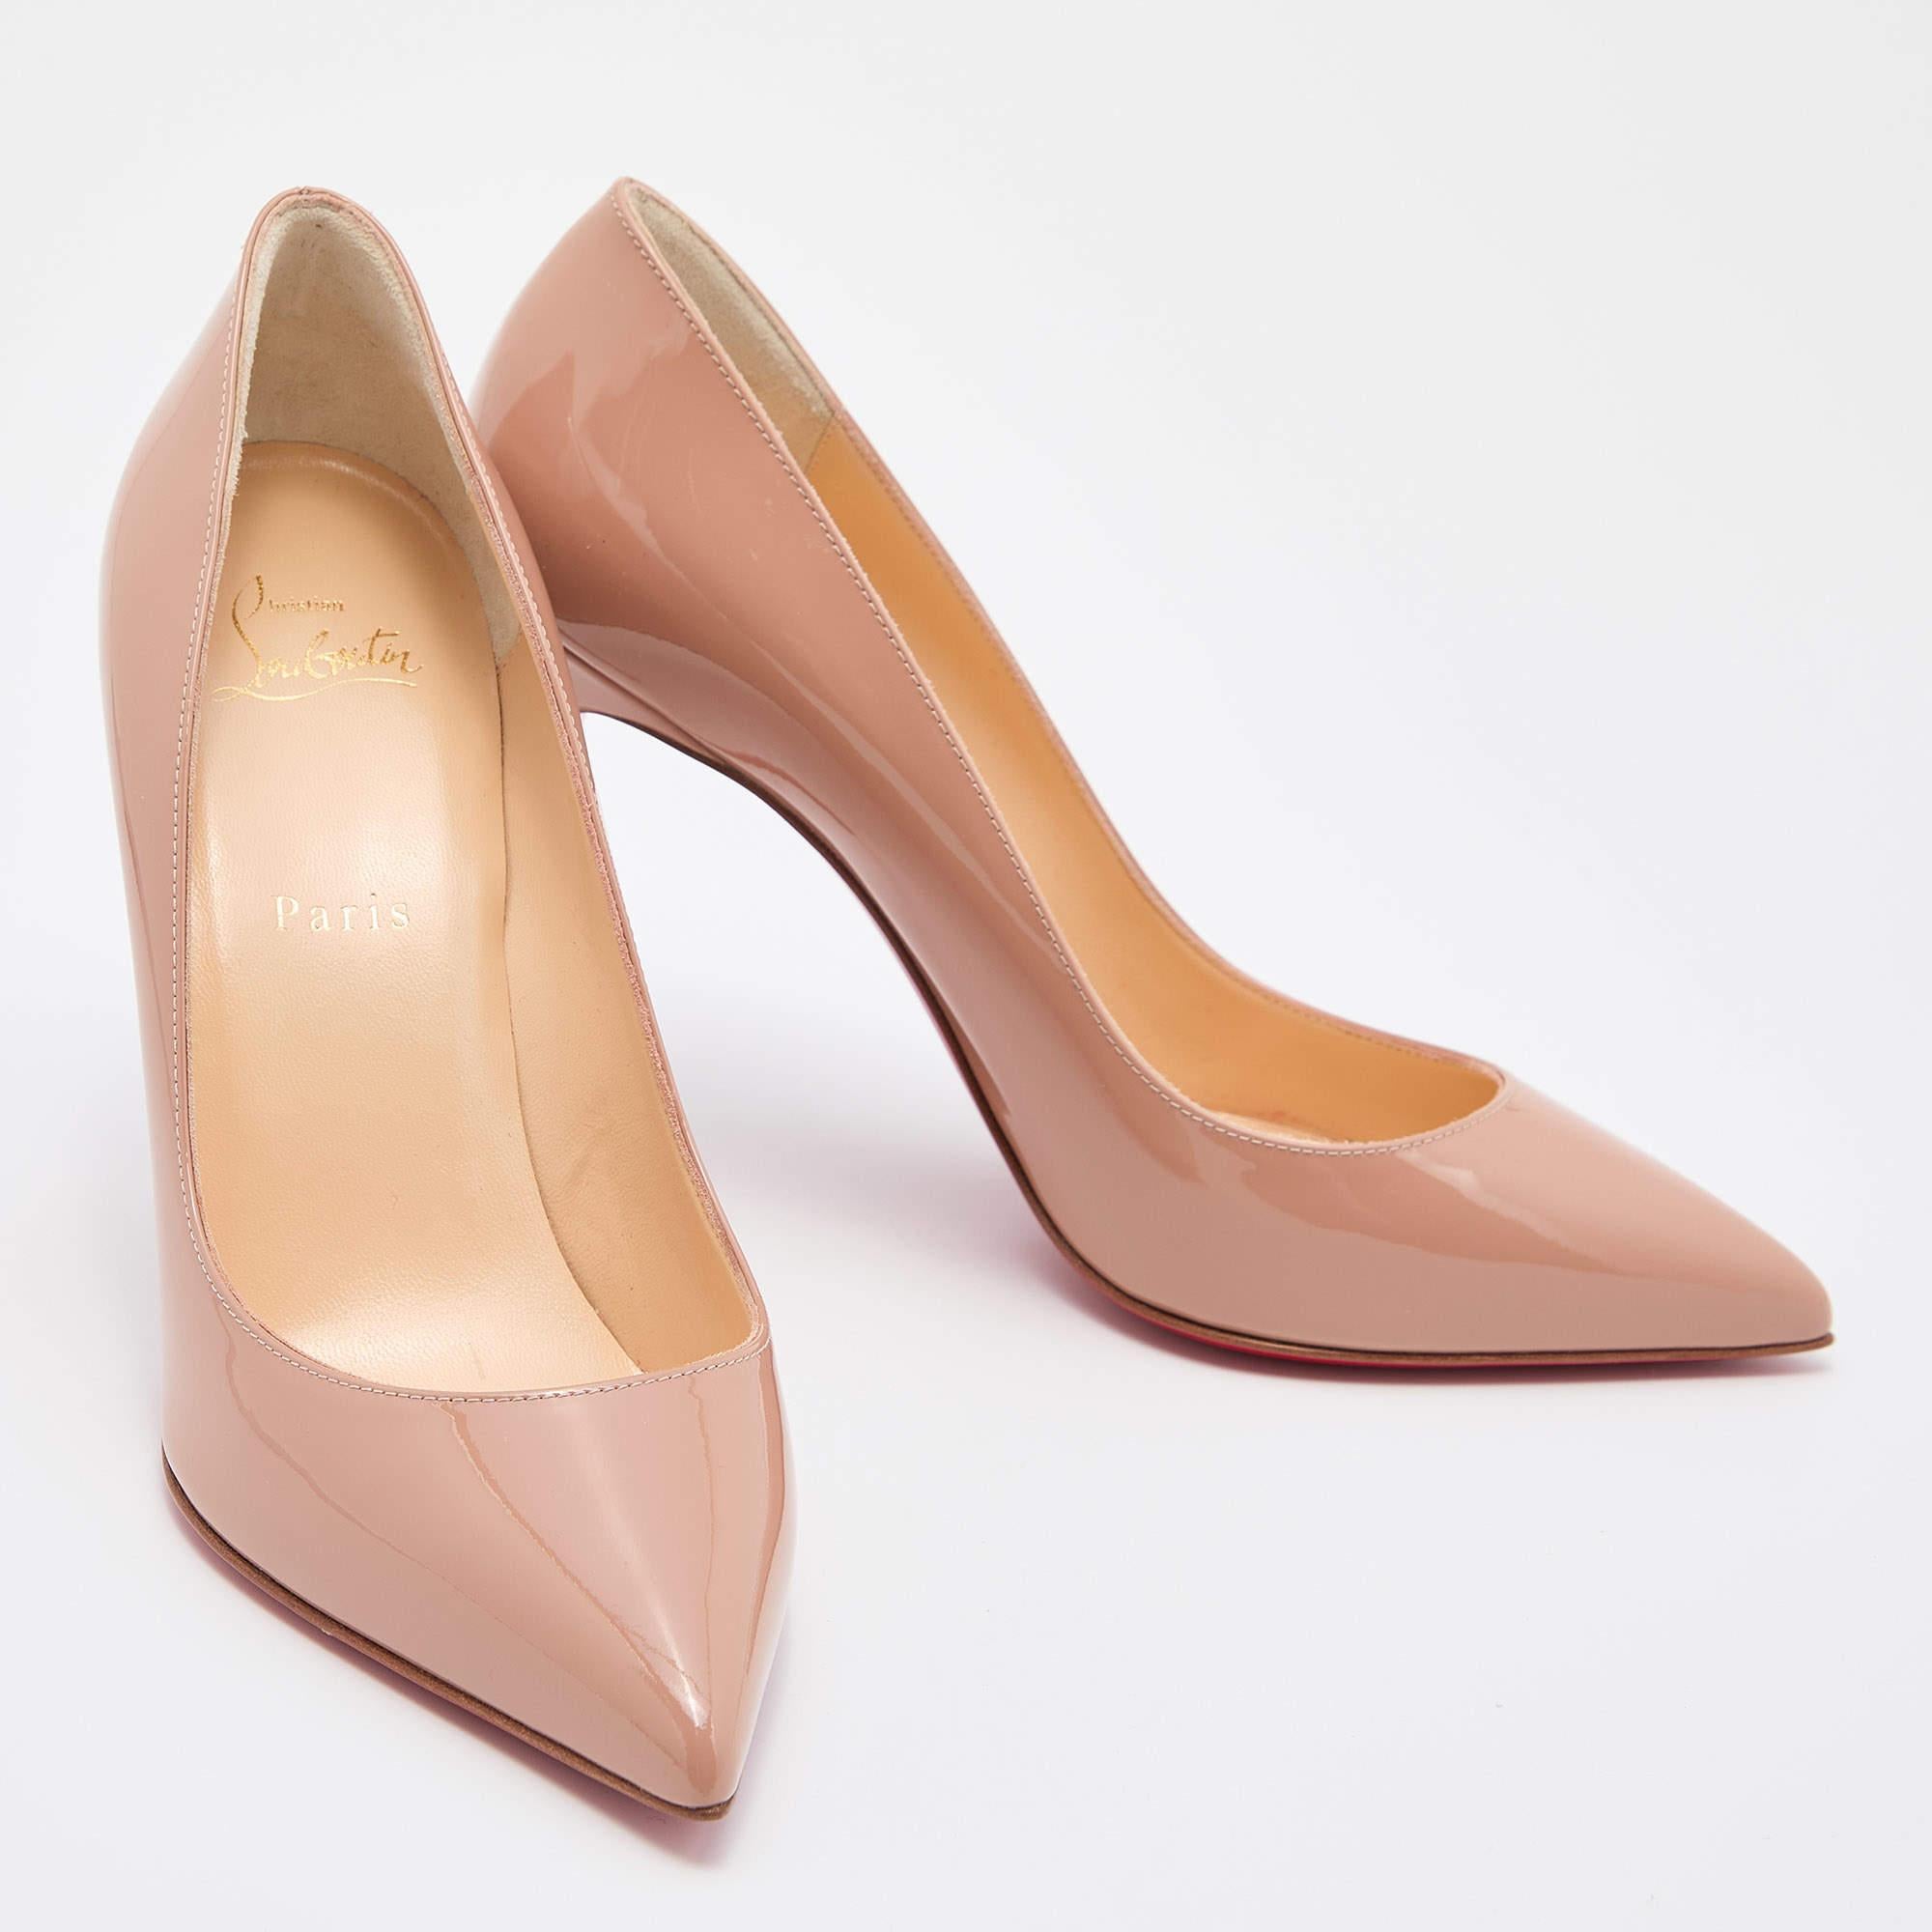 Christian Louboutin Nude Patent Leather Pigalle Pumps Size 39 1